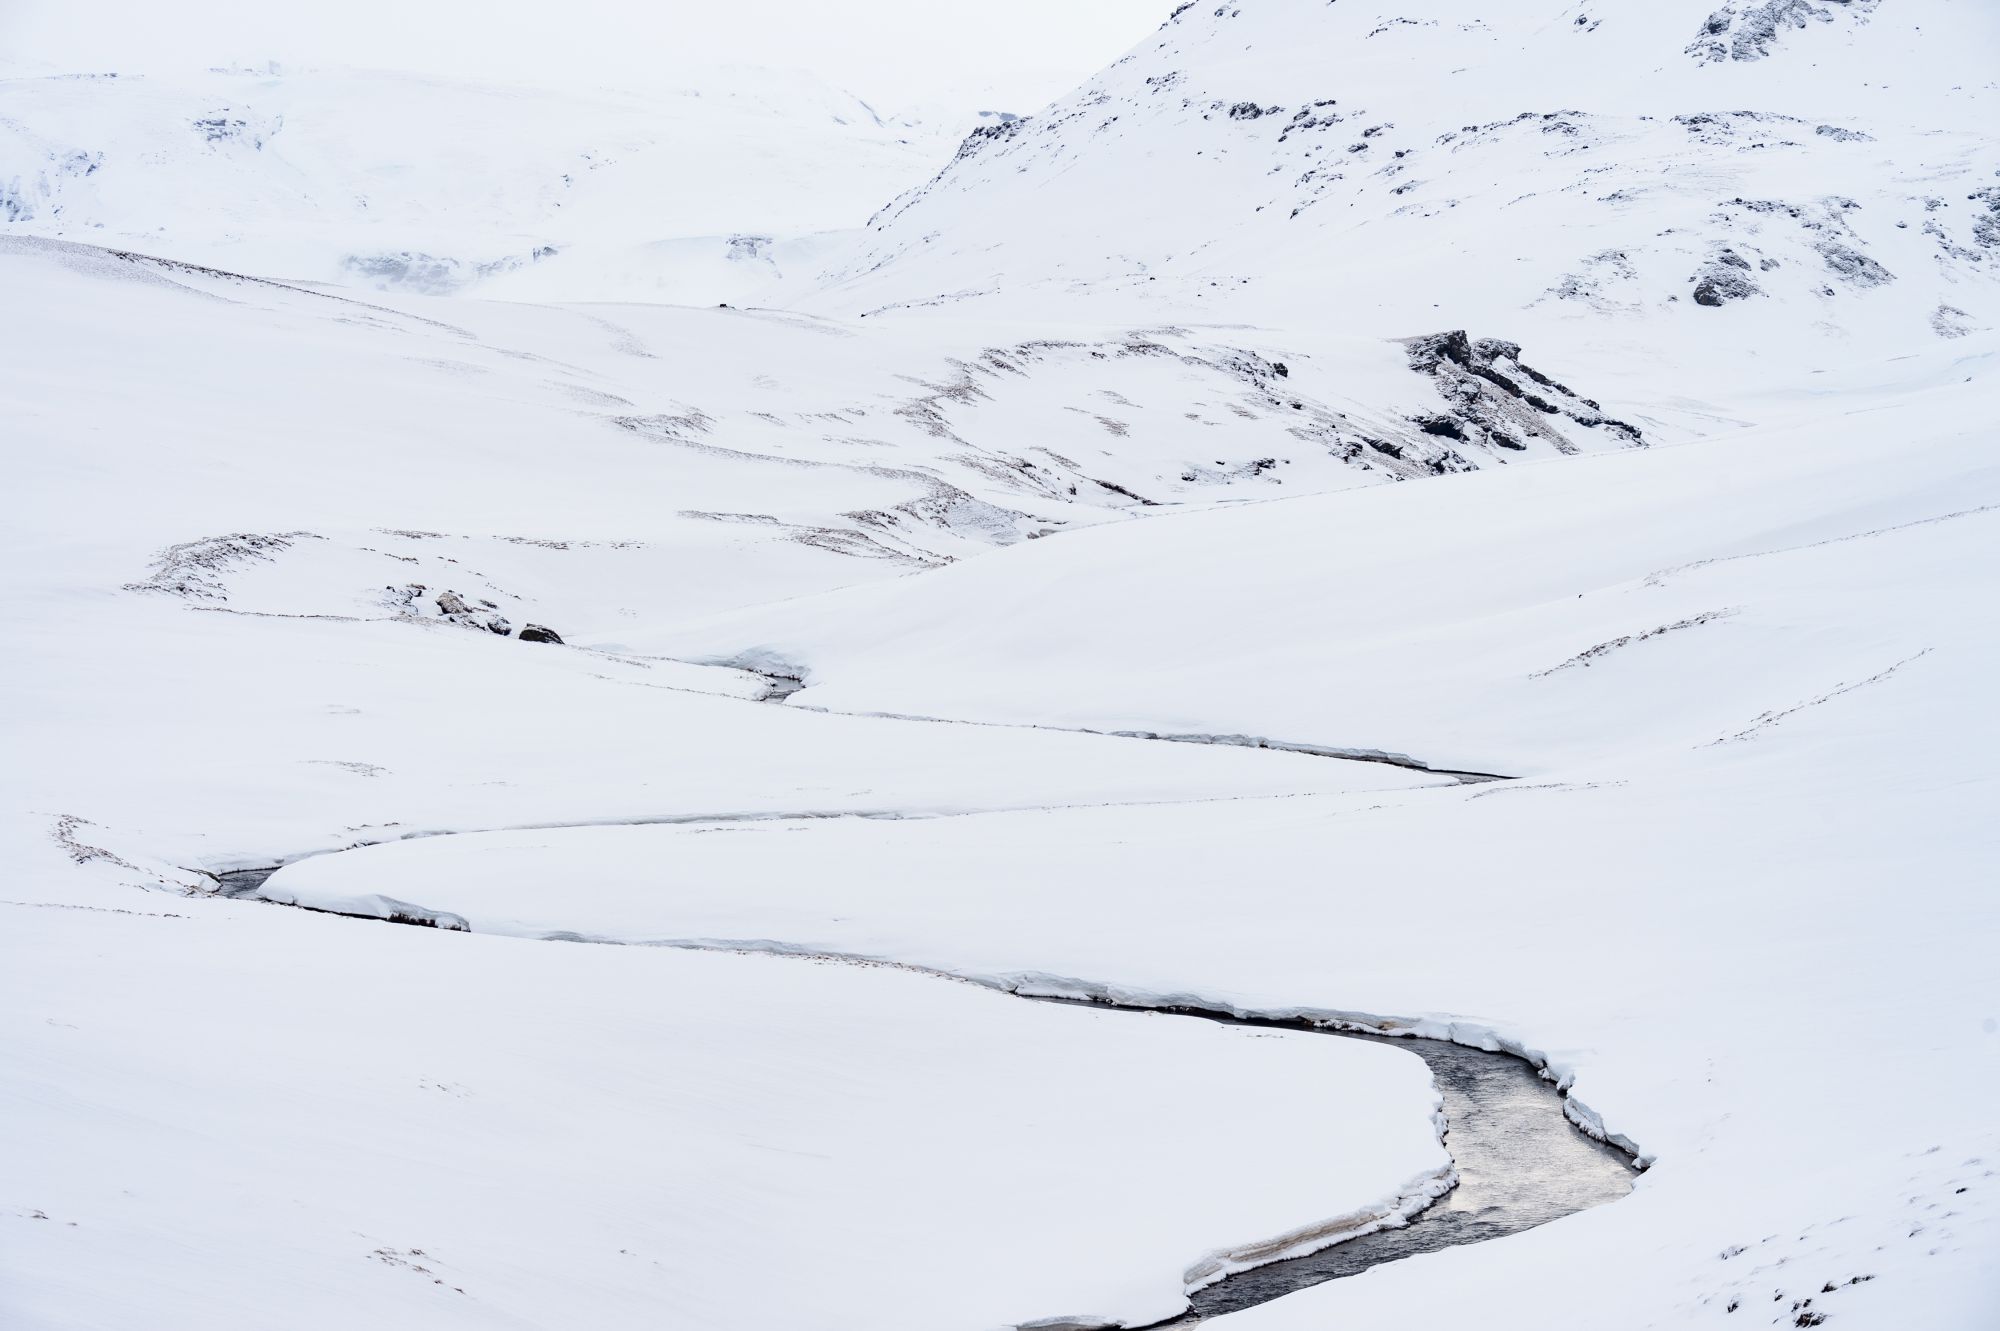 River meandering through the snow